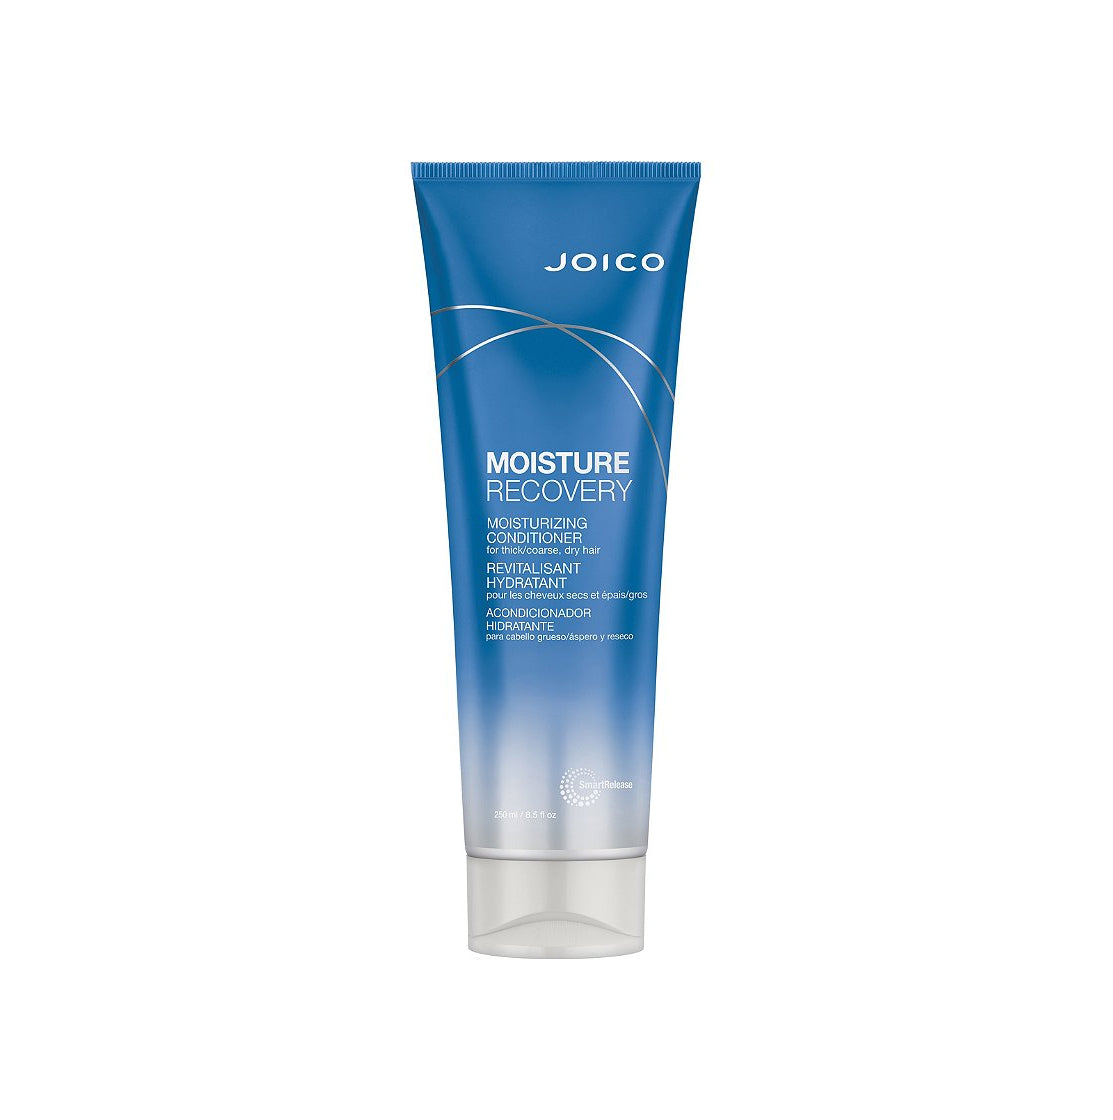 Moisture Recovery Set - Joico Conditioner for Strands, Restores Smoothness and Elasticity to Dehydrated Hair